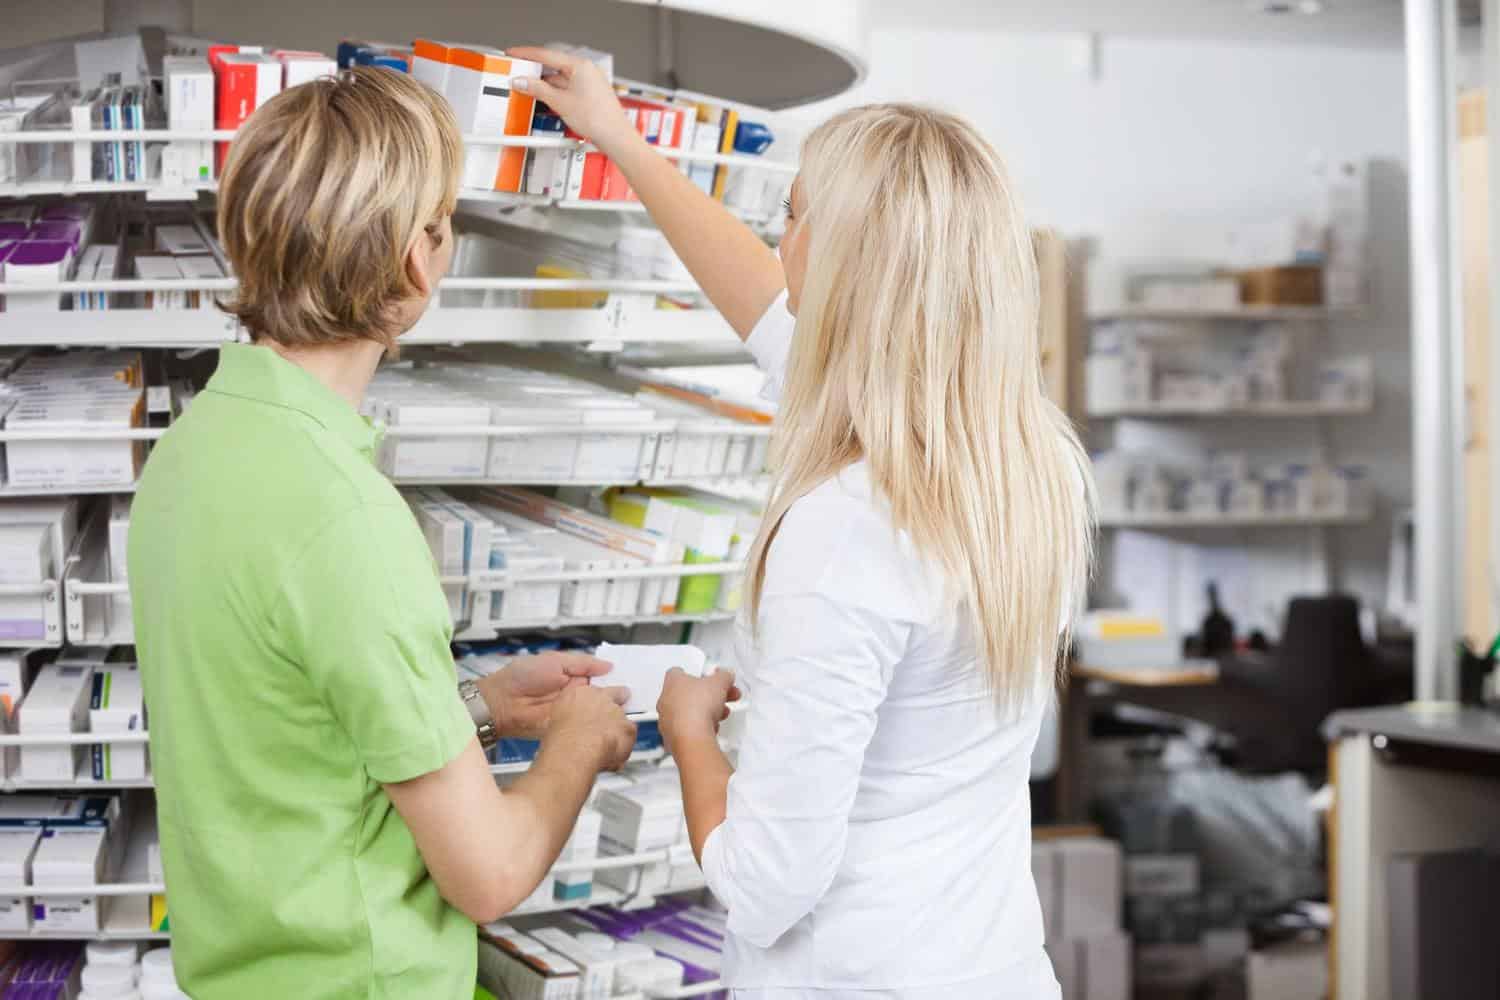 A woman shopping for medicine at a pharmacy